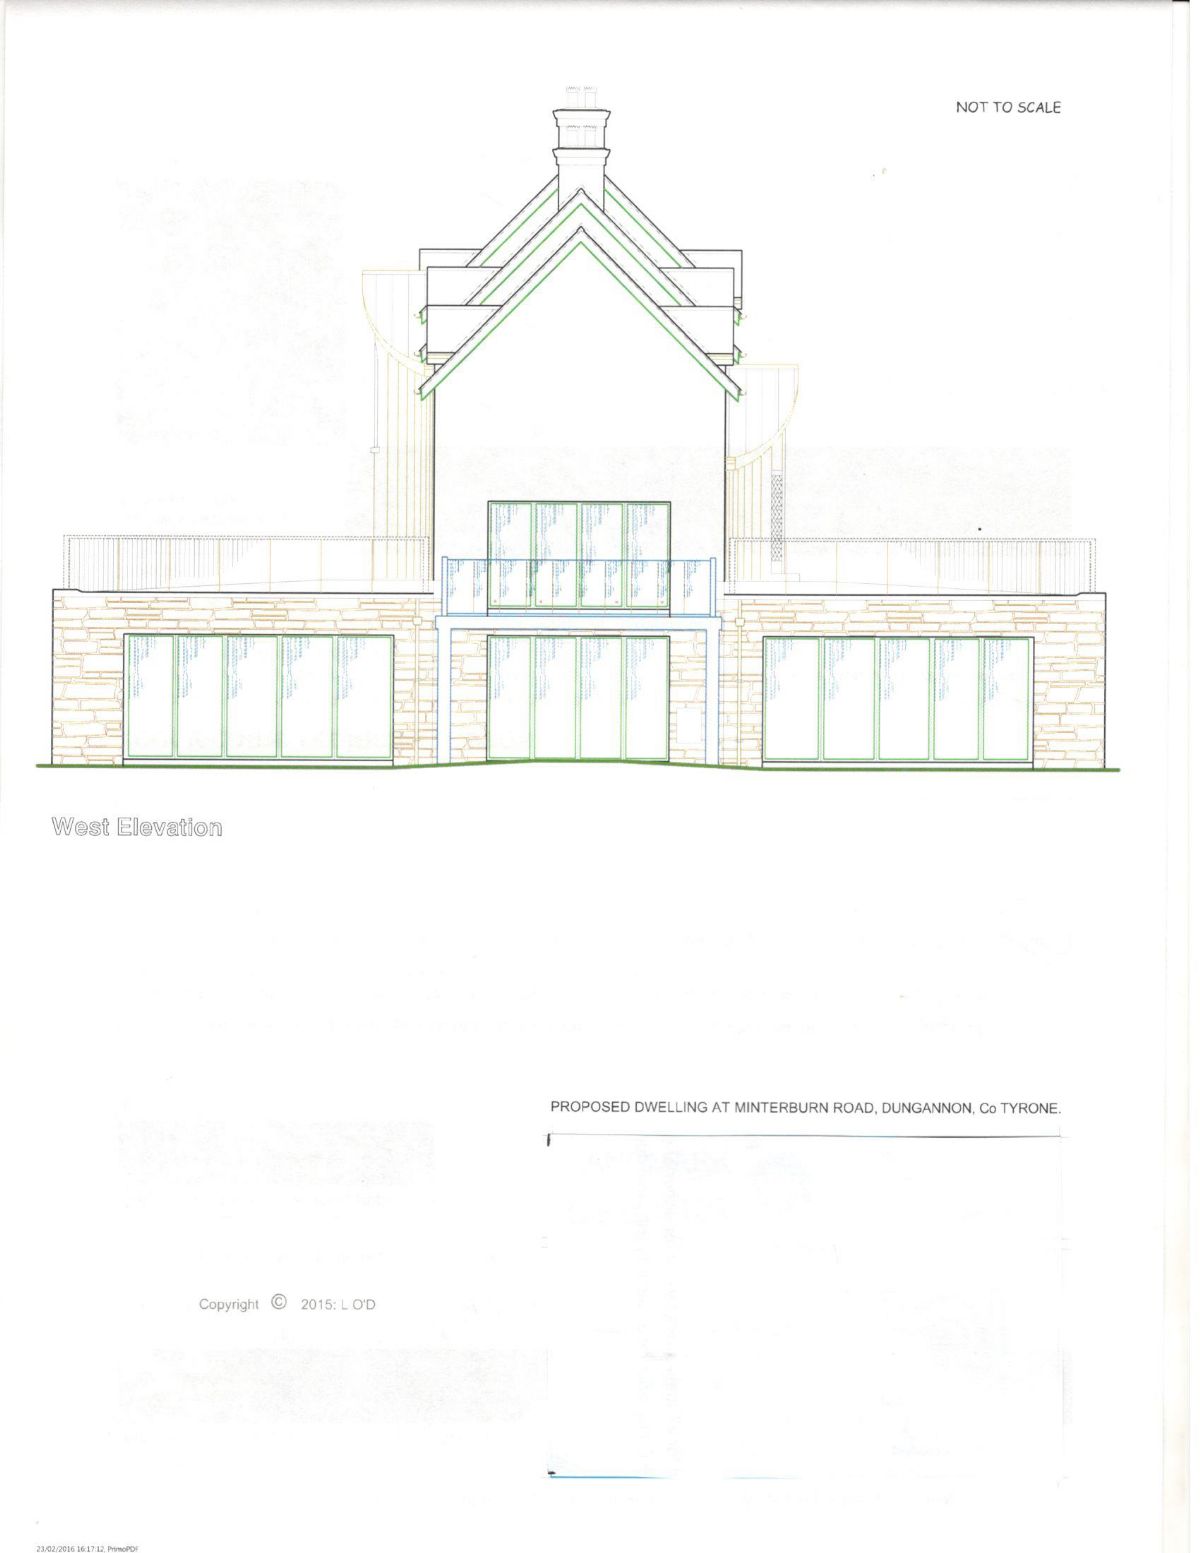 Proposed Dwelling @ Mullyneil Road